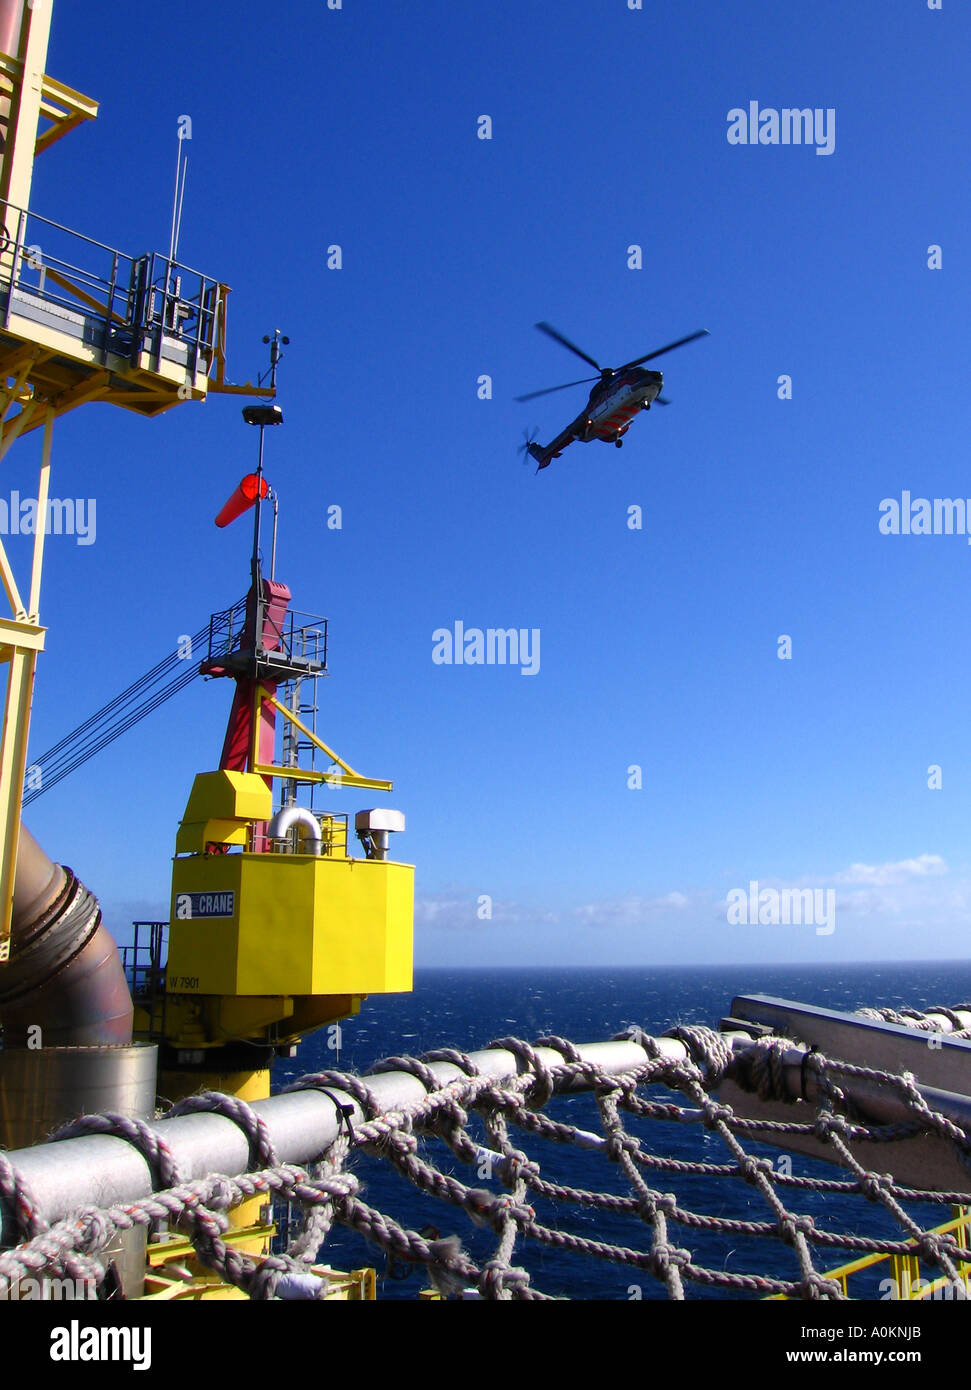 A helicopter coming in for landing on a North sea oil rig against a deep blue sky in portrait format. Stock Photo